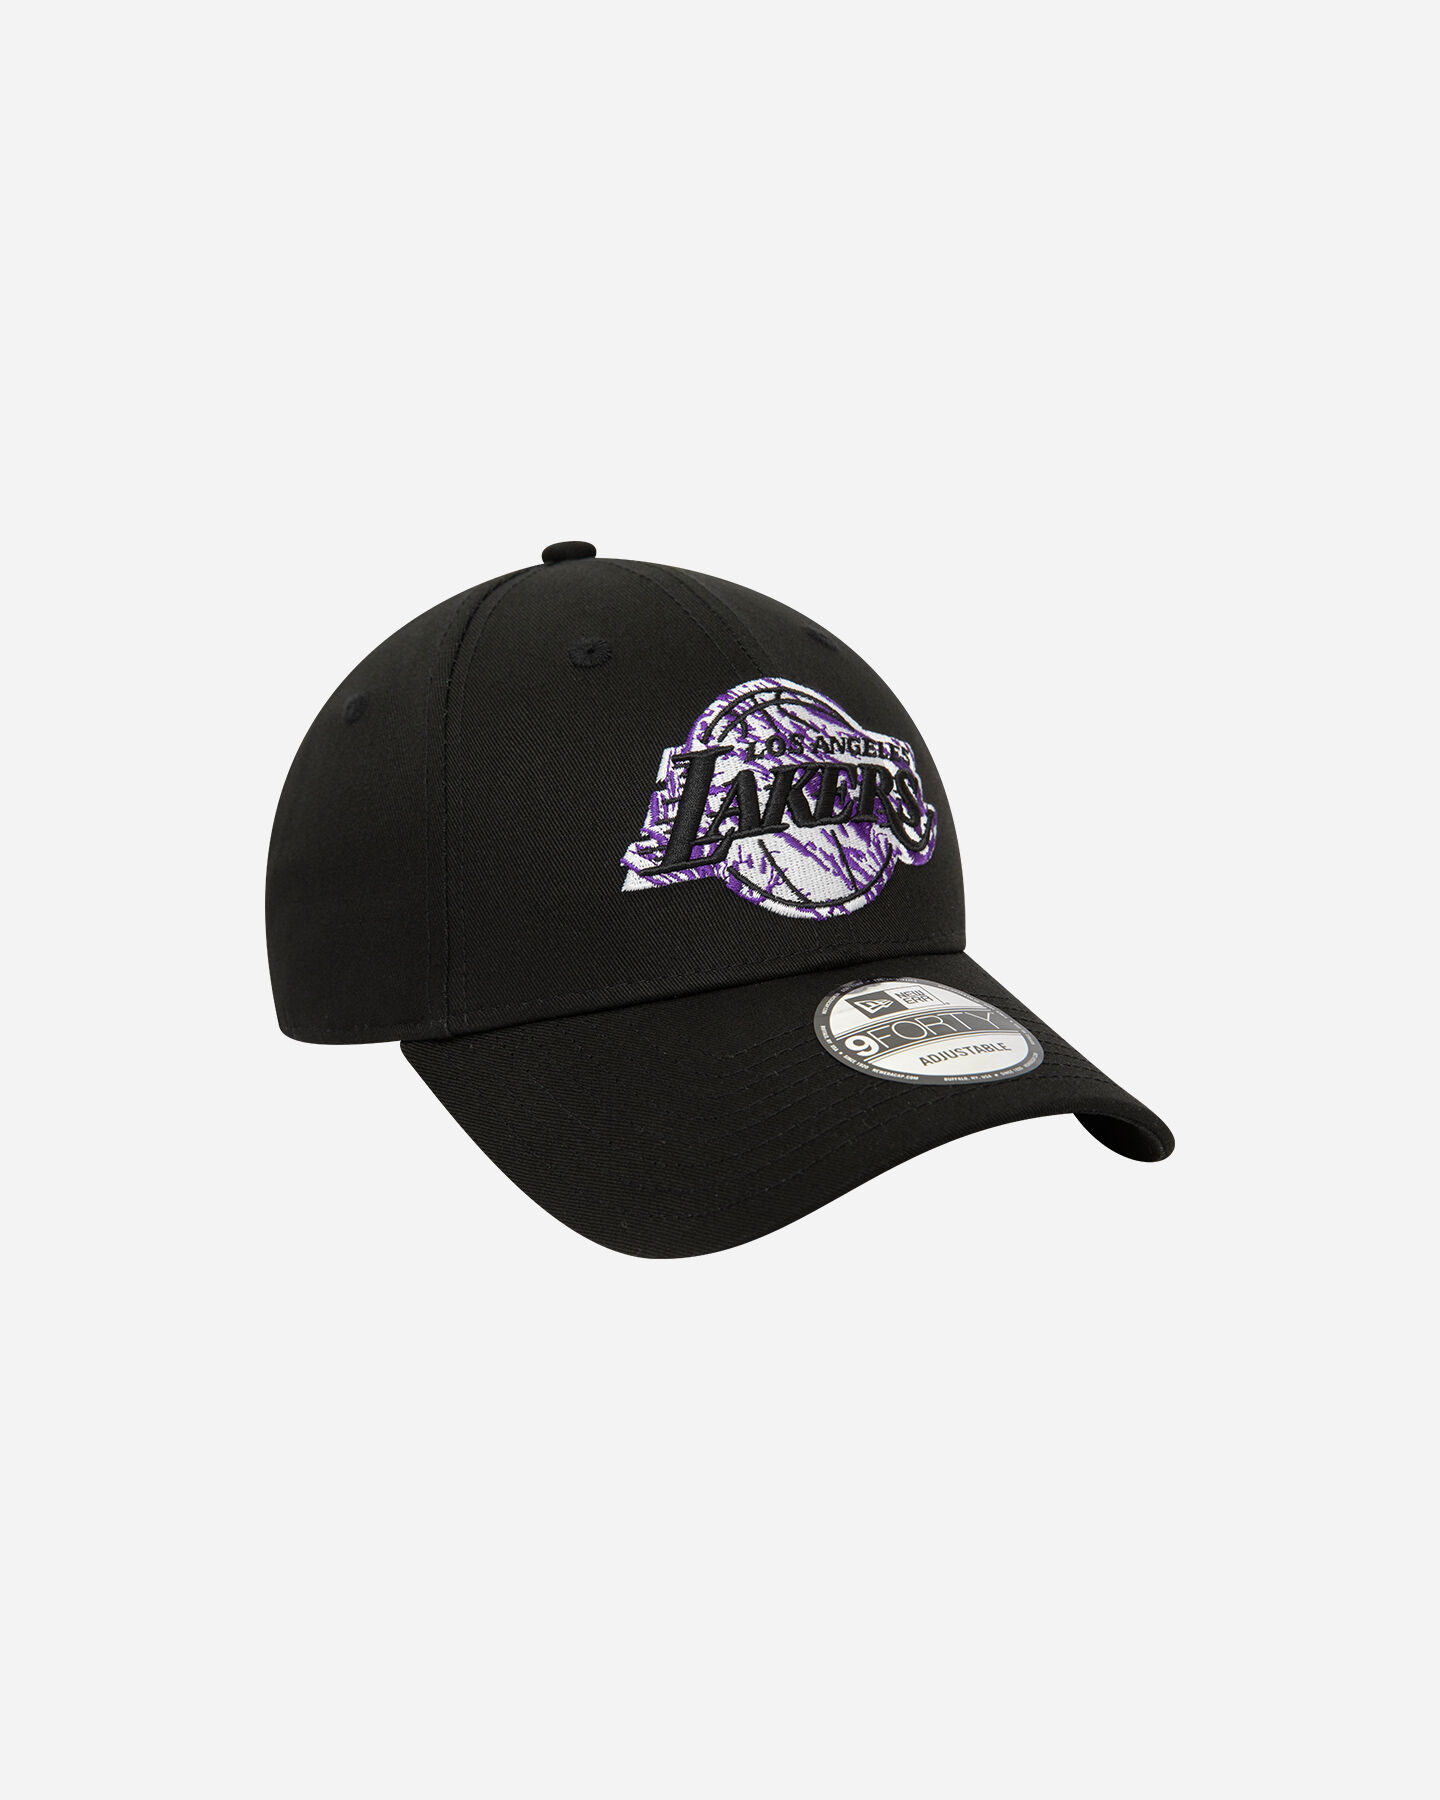  Cappellino NEW ERA 9FORTY INFILL LAKERS M S5670810|001|OSFM scatto 2